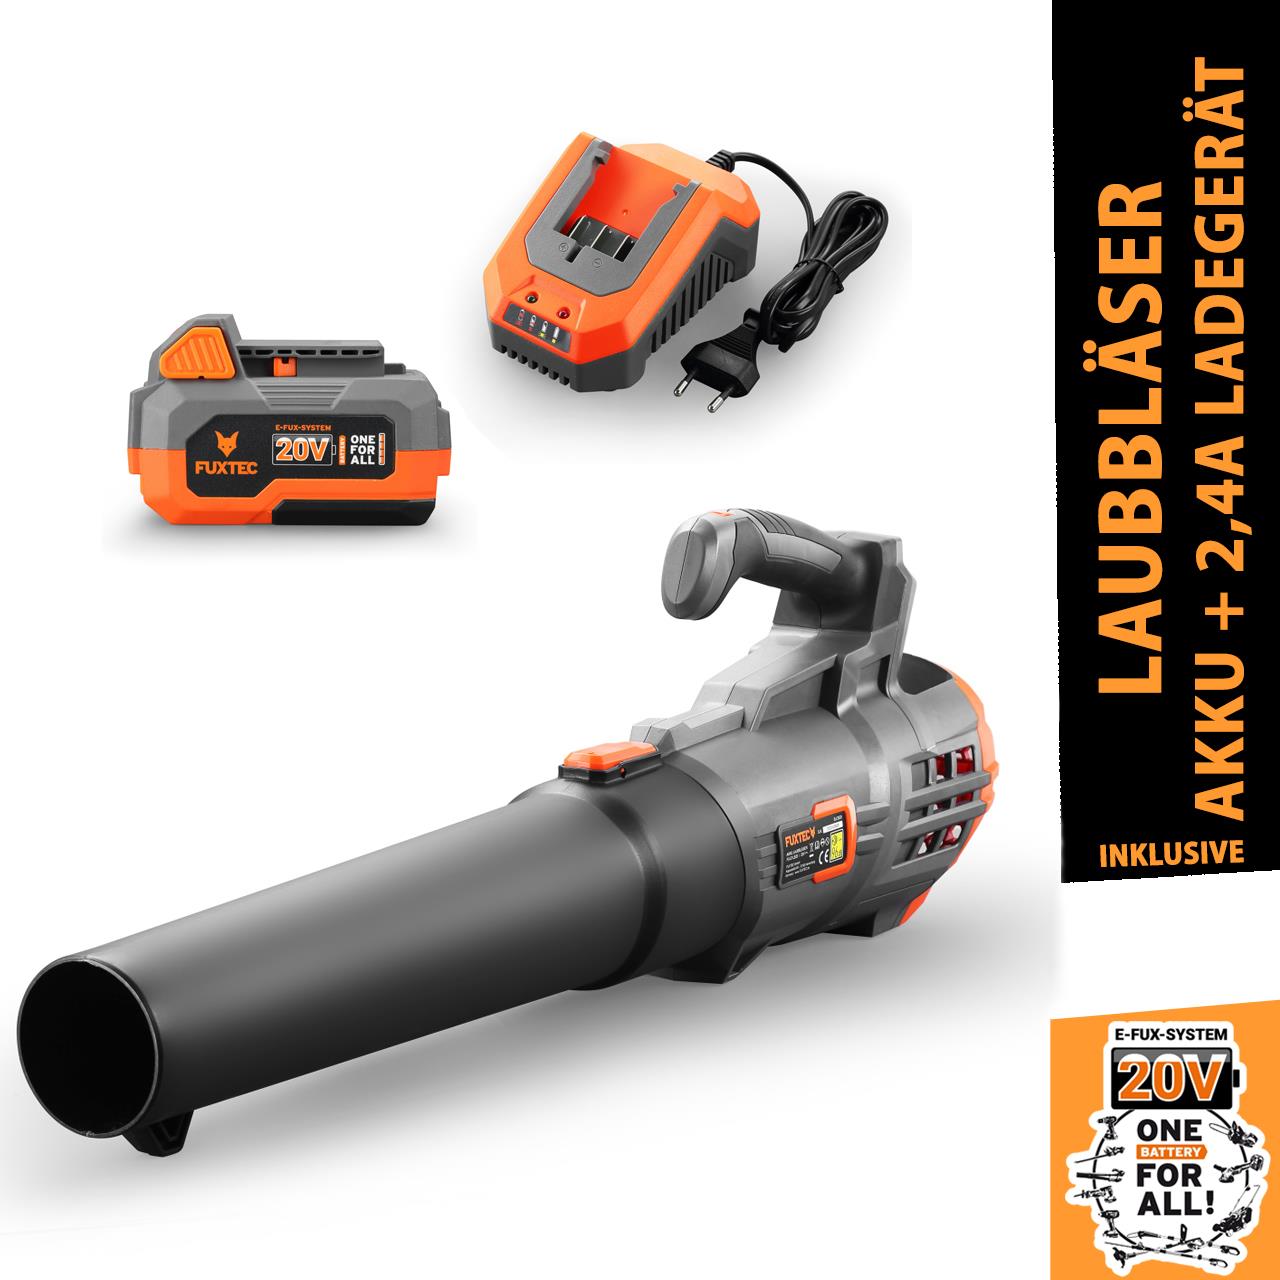 20V cordless leaf blower - Kit FUXTEC FX-E1LB20 incl. battery (4Ah) and charger (1A)